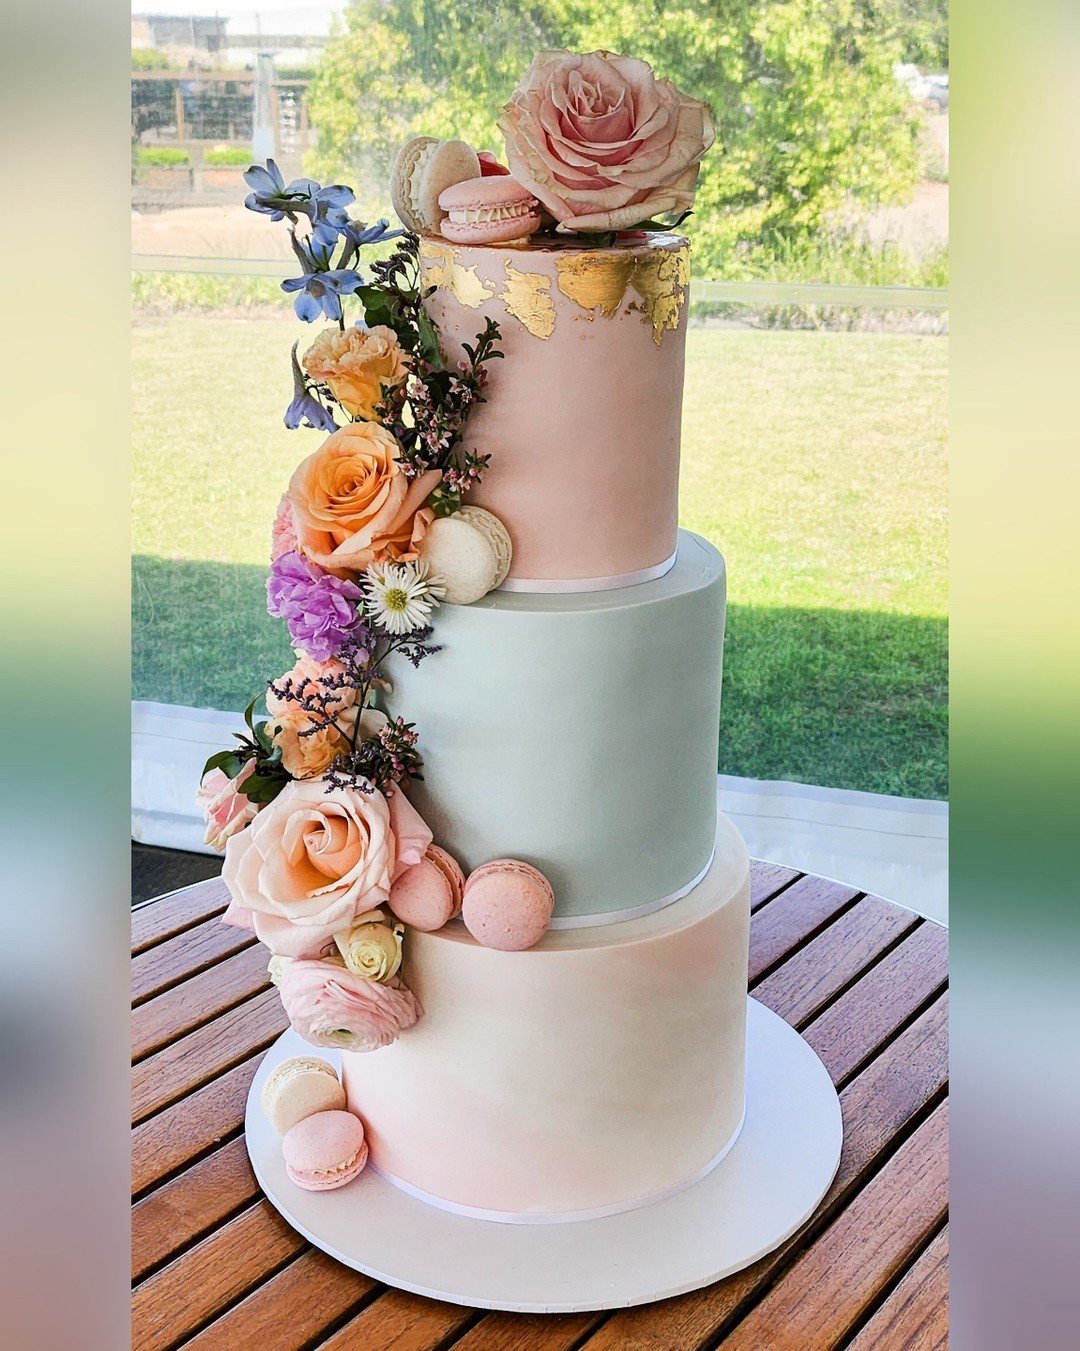 Ann &amp; Raul - 16/09/2023

3 tier fondant cake in delicious caramel, white choc passionfruit &amp; chocolate topped with marbling, gold leaf ✨ &amp; macarons. 

📍 @petersonhouseweddings
💐 @huntervalleybouquets

#dragonflycakes #newcastlensw #hunt